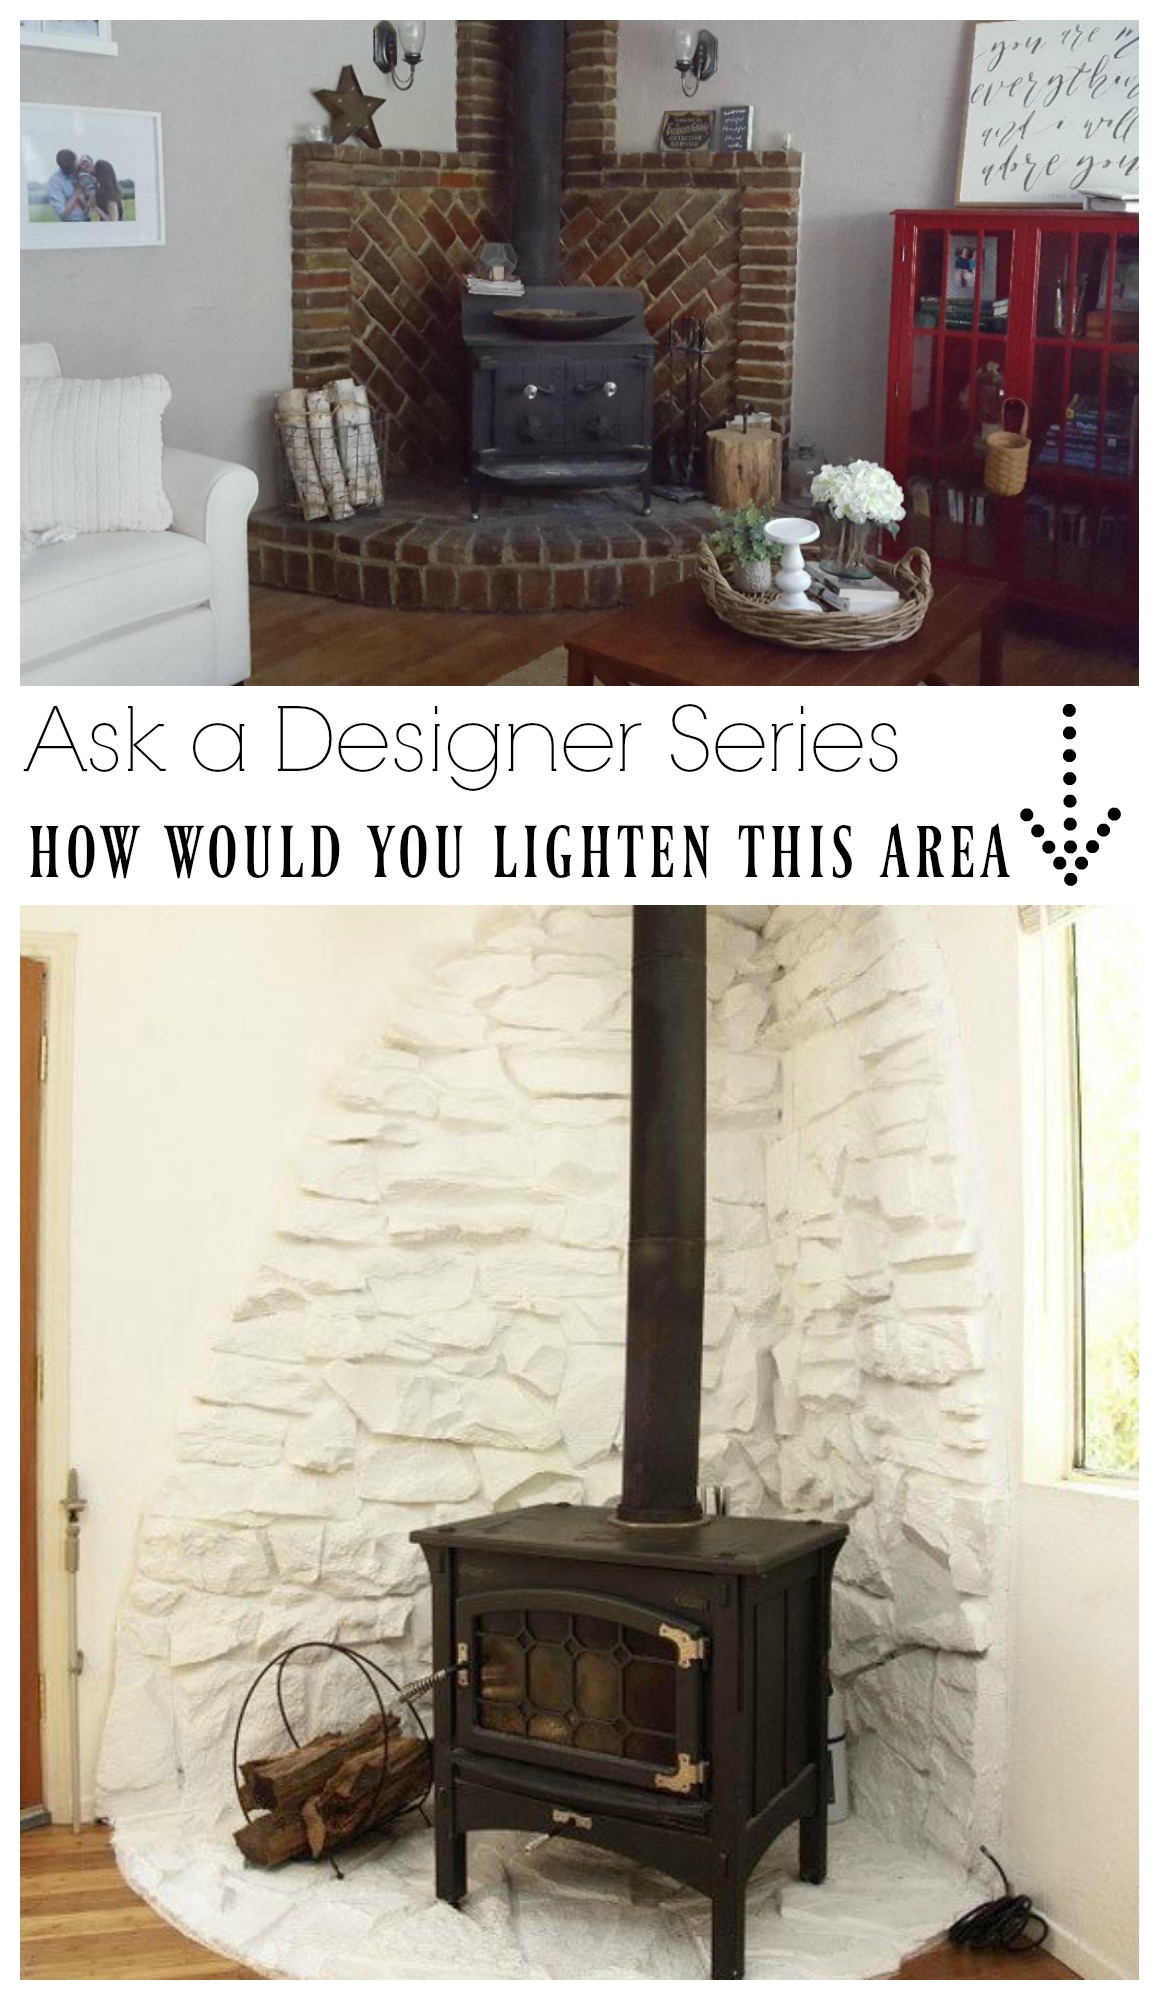 Ask a Designer Series- How would you lighten this fireplace/